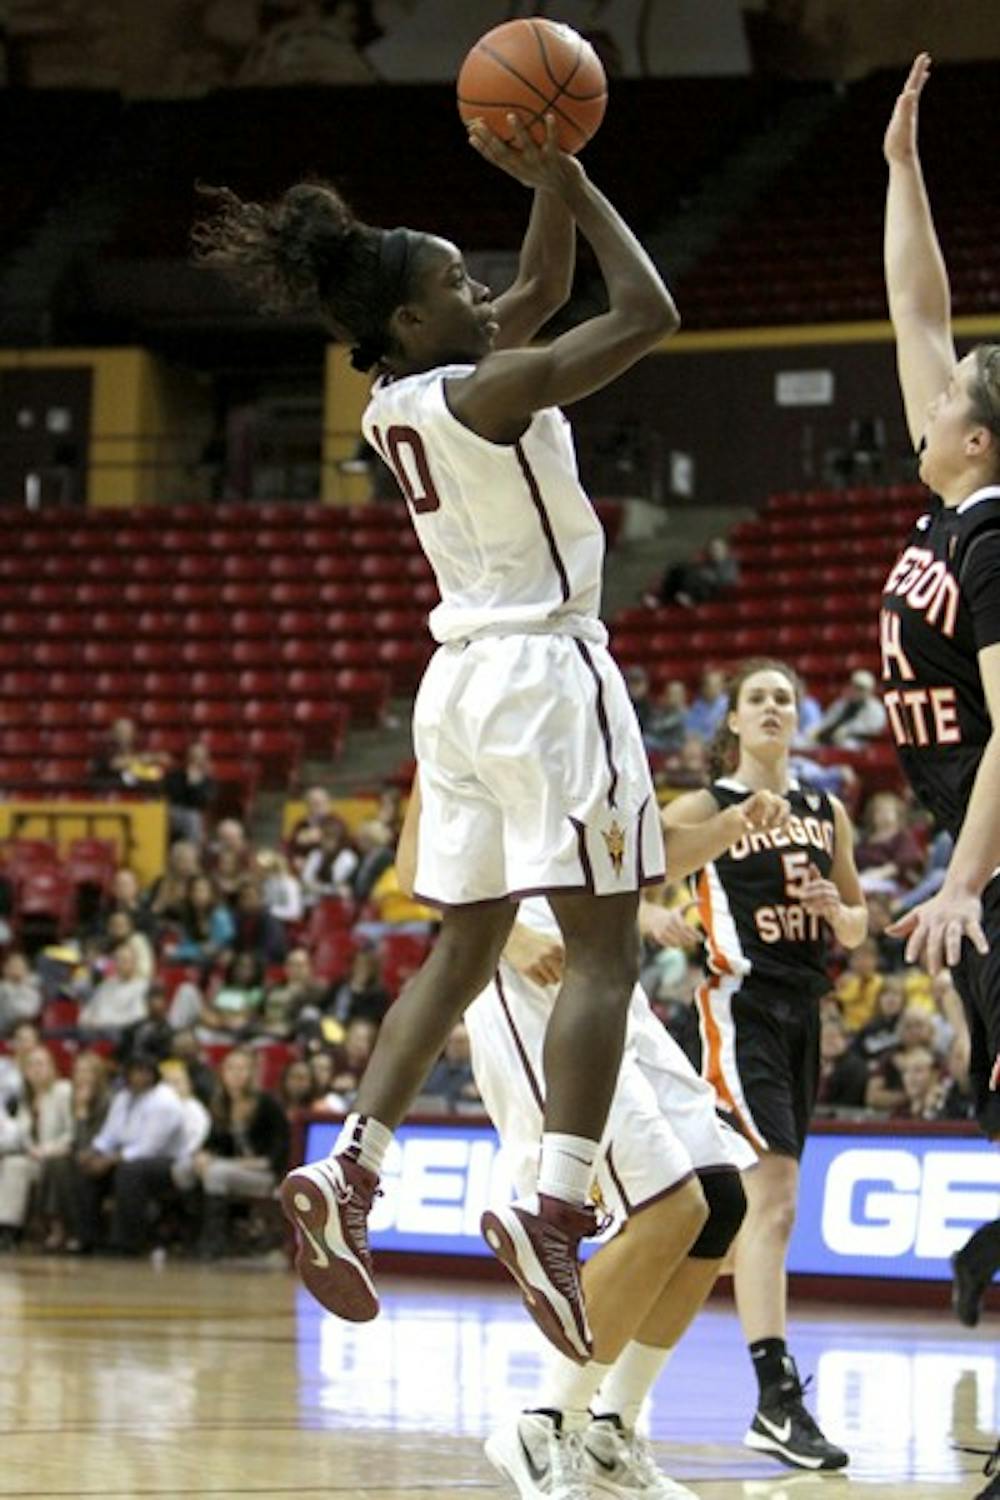 Sophomore guard Promise Amukamara pulls up for a jump shot during Sunday's game against Oregon State. The Sun Devils won 66-55. (Photo by Molly J Smith)